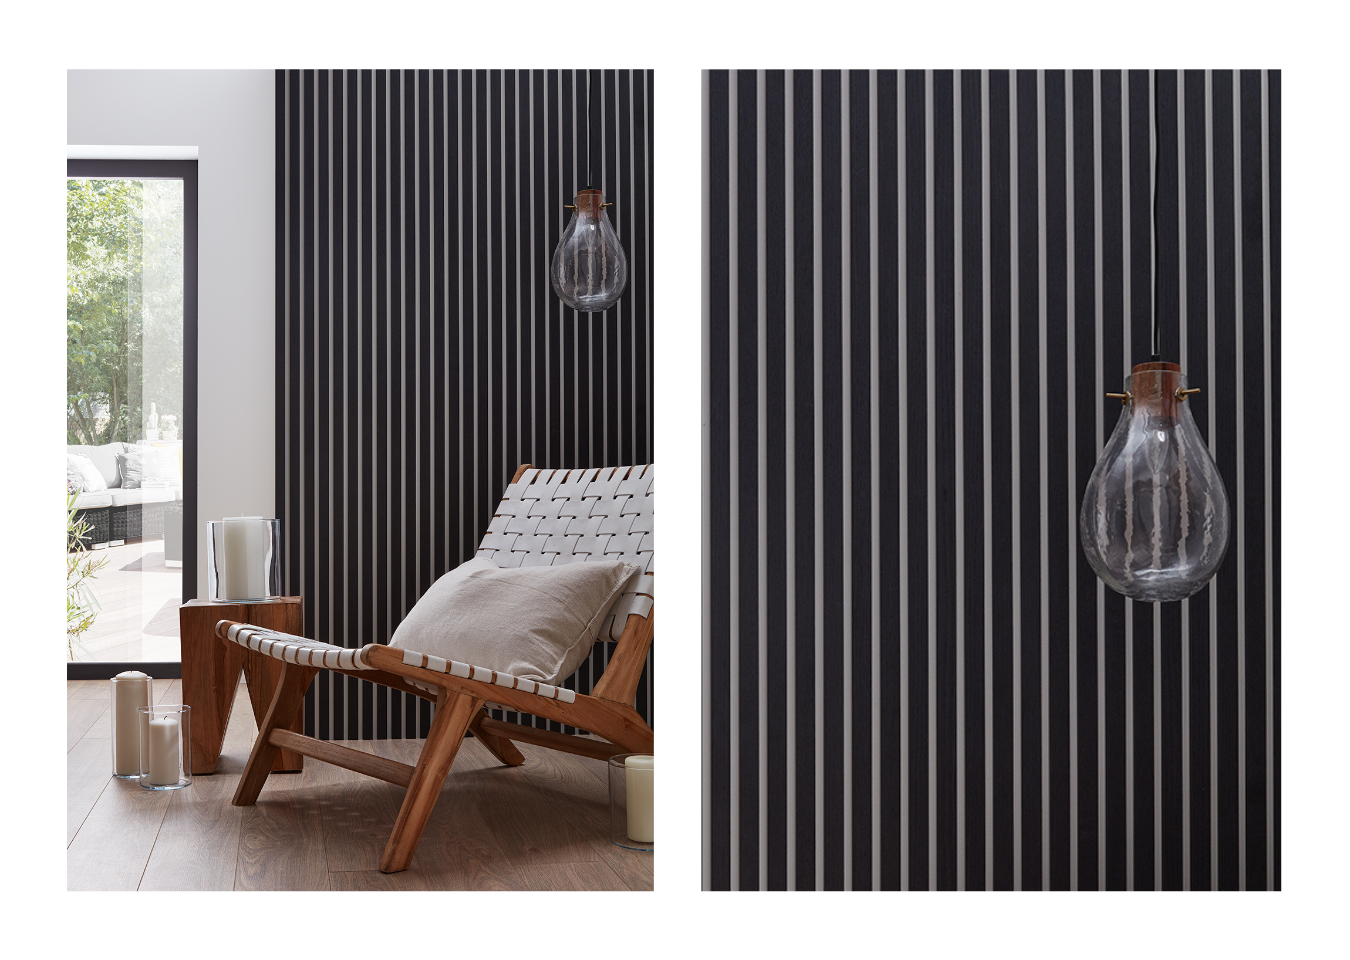 Five Ways to Decorate with Wooden Wall Slats